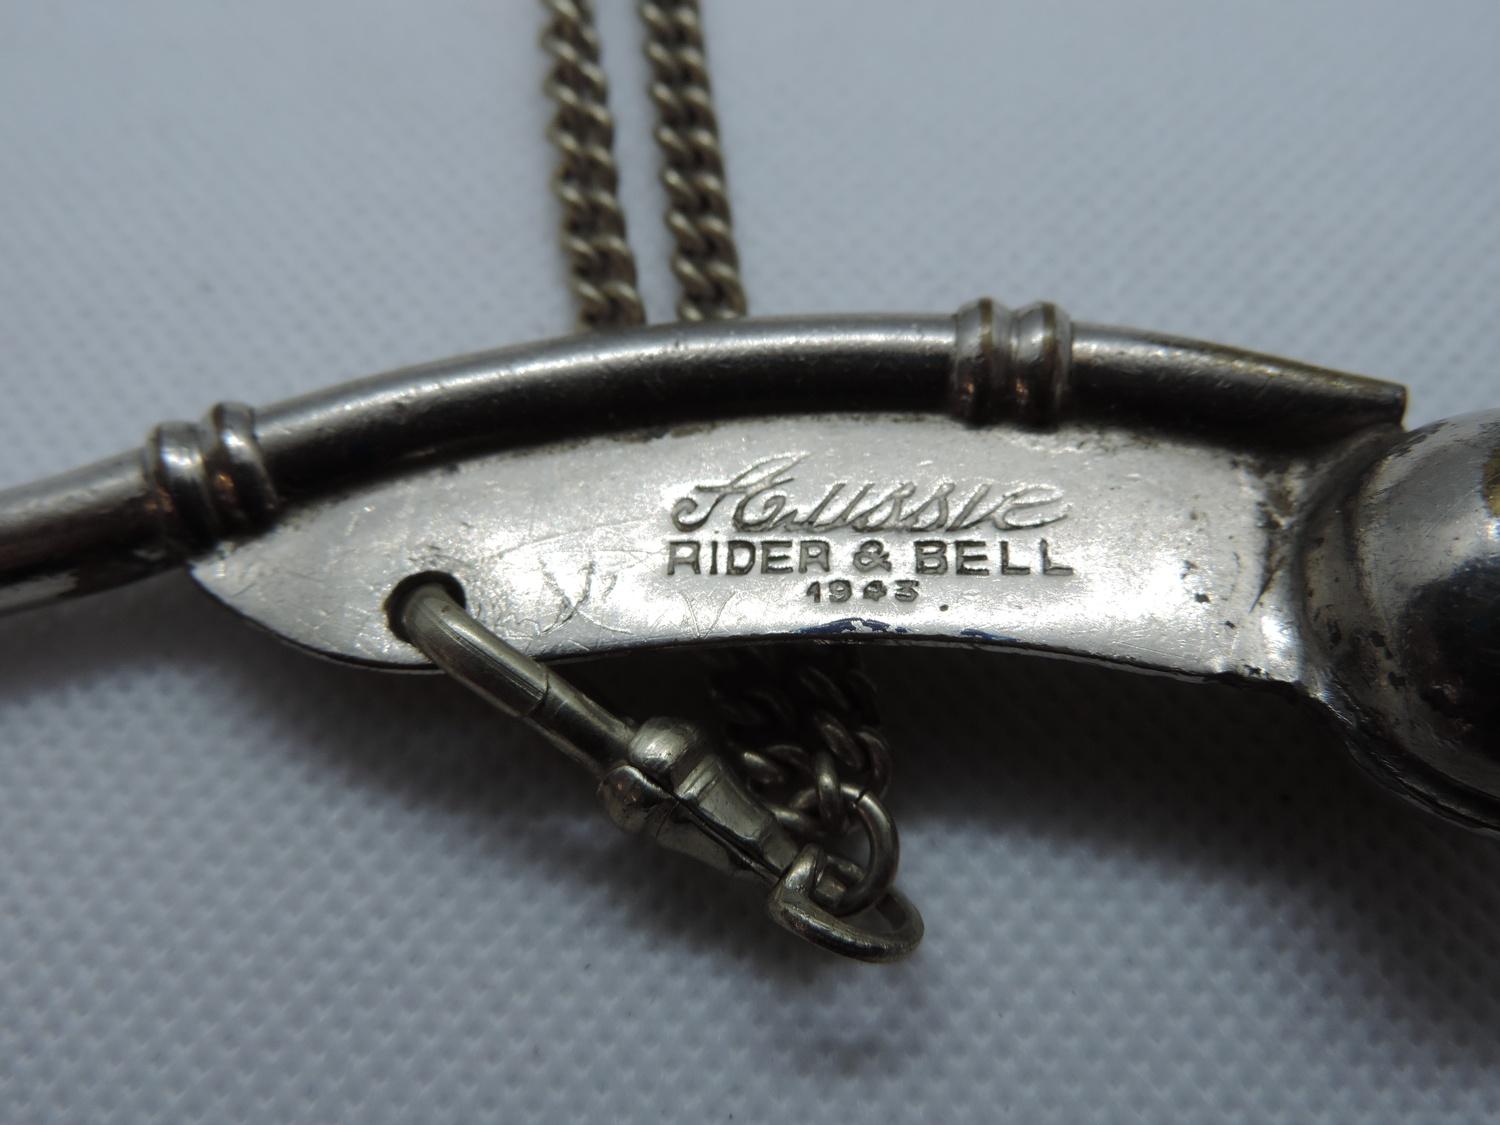 Rider and Bell Aussie Whistle - Dated 1944 on White Metal Chain - Image 2 of 4